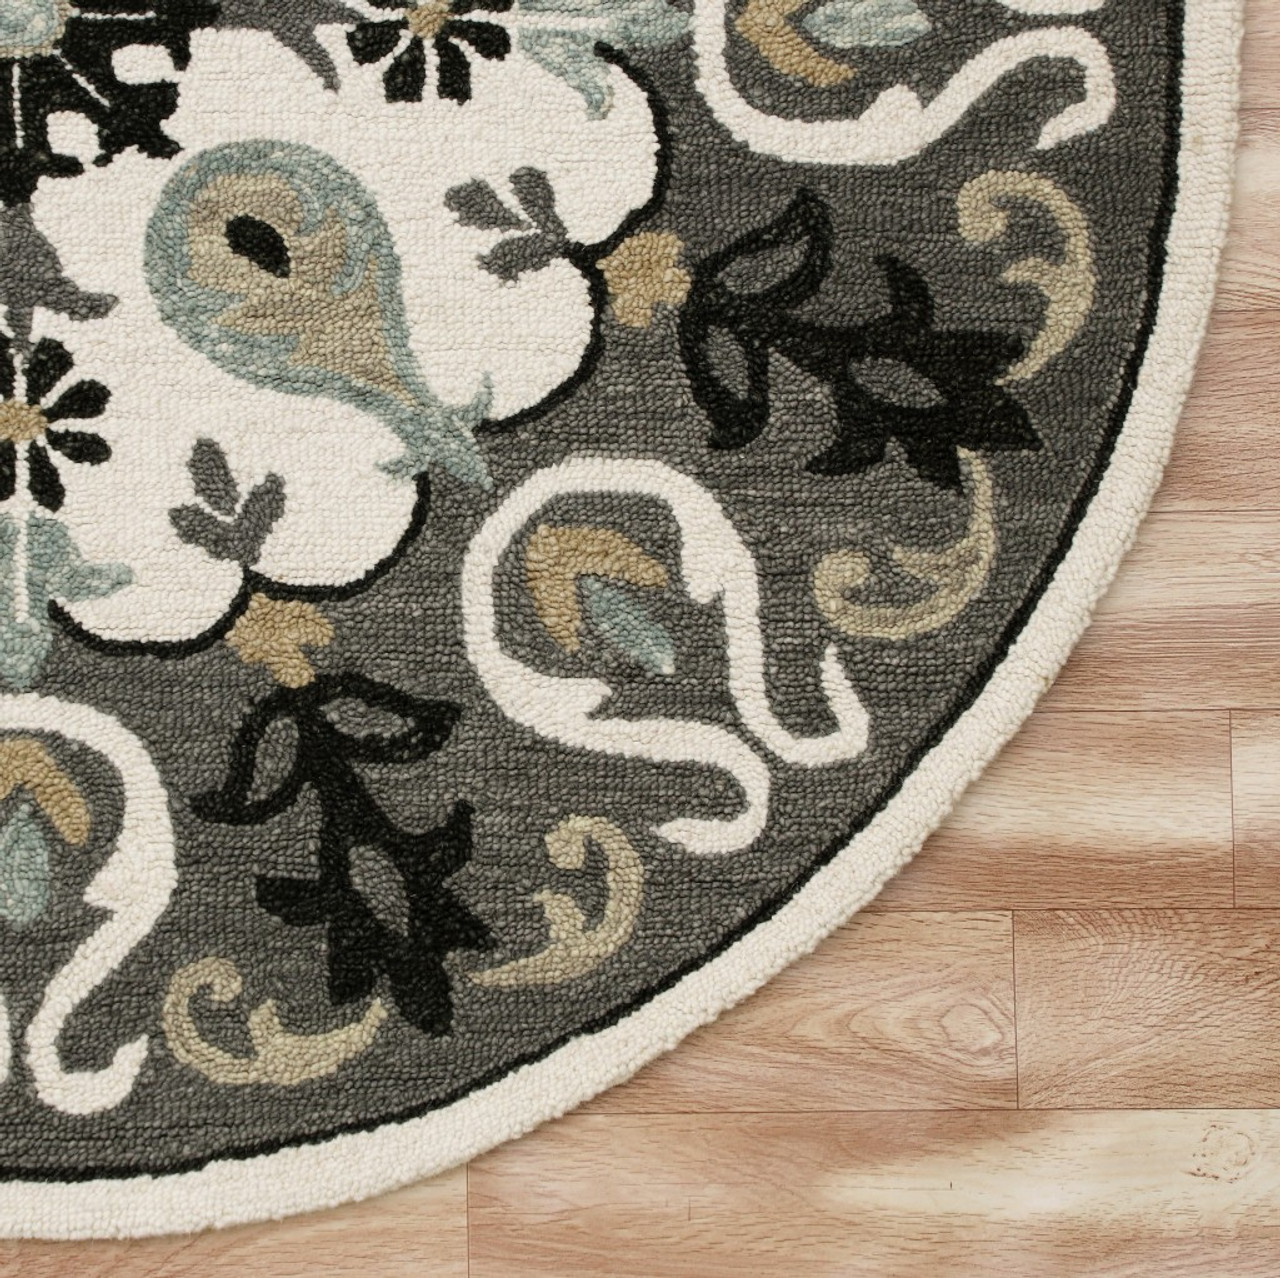 https://cdn11.bigcommerce.com/s-oo0gdojvjo/images/stencil/1280x1280/products/80281/141354/396262-7-gray-round-wool-hand-hooked-handmade-area-rug-4__74194.1699181286.jpg?c=2&imbypass=on